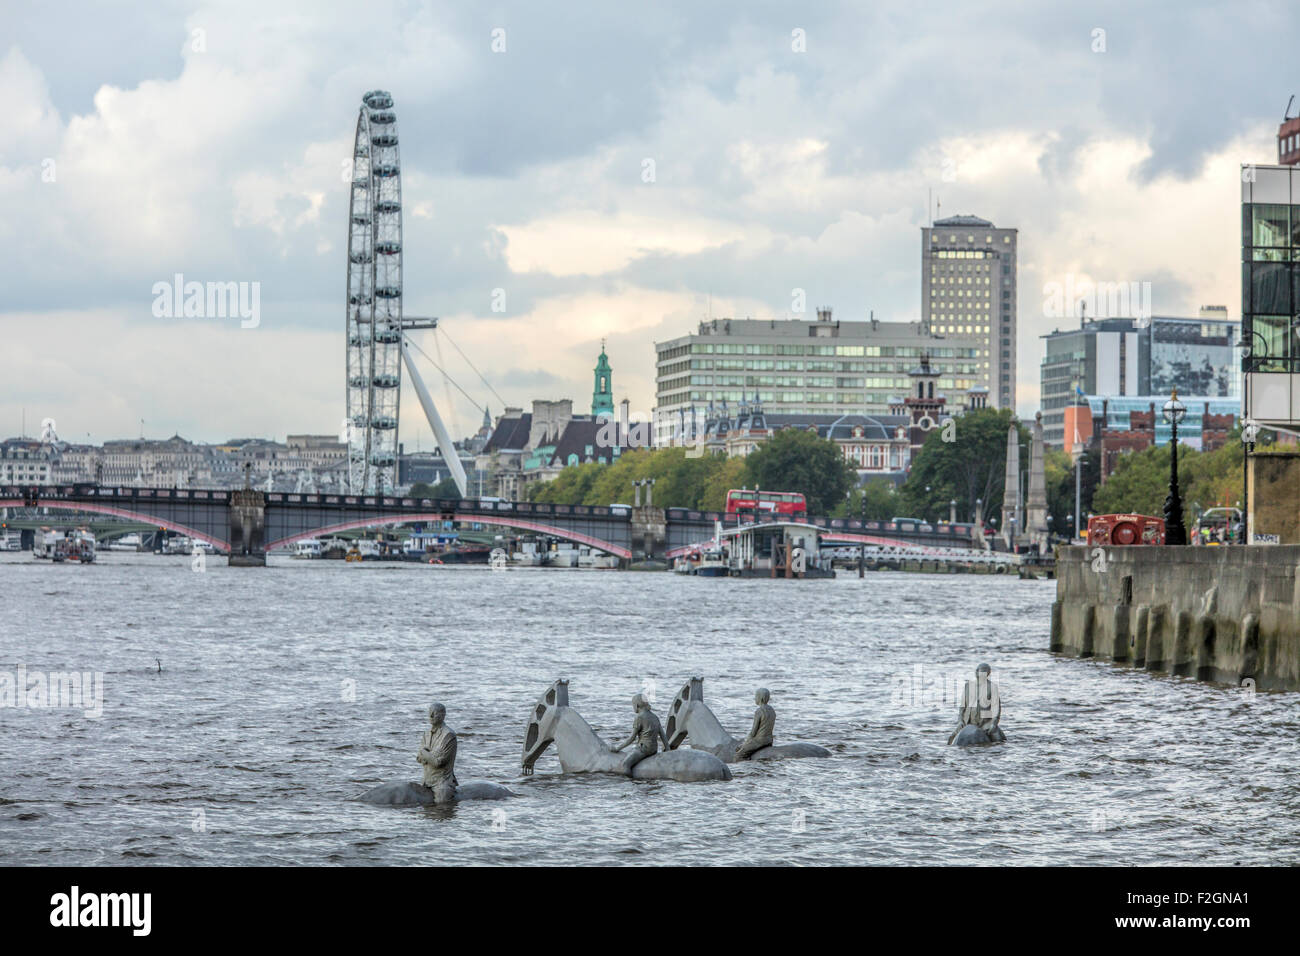 White horses in the River Thames at high tide with Lambeth Bridge and the London Eye in the distance. Stock Photo